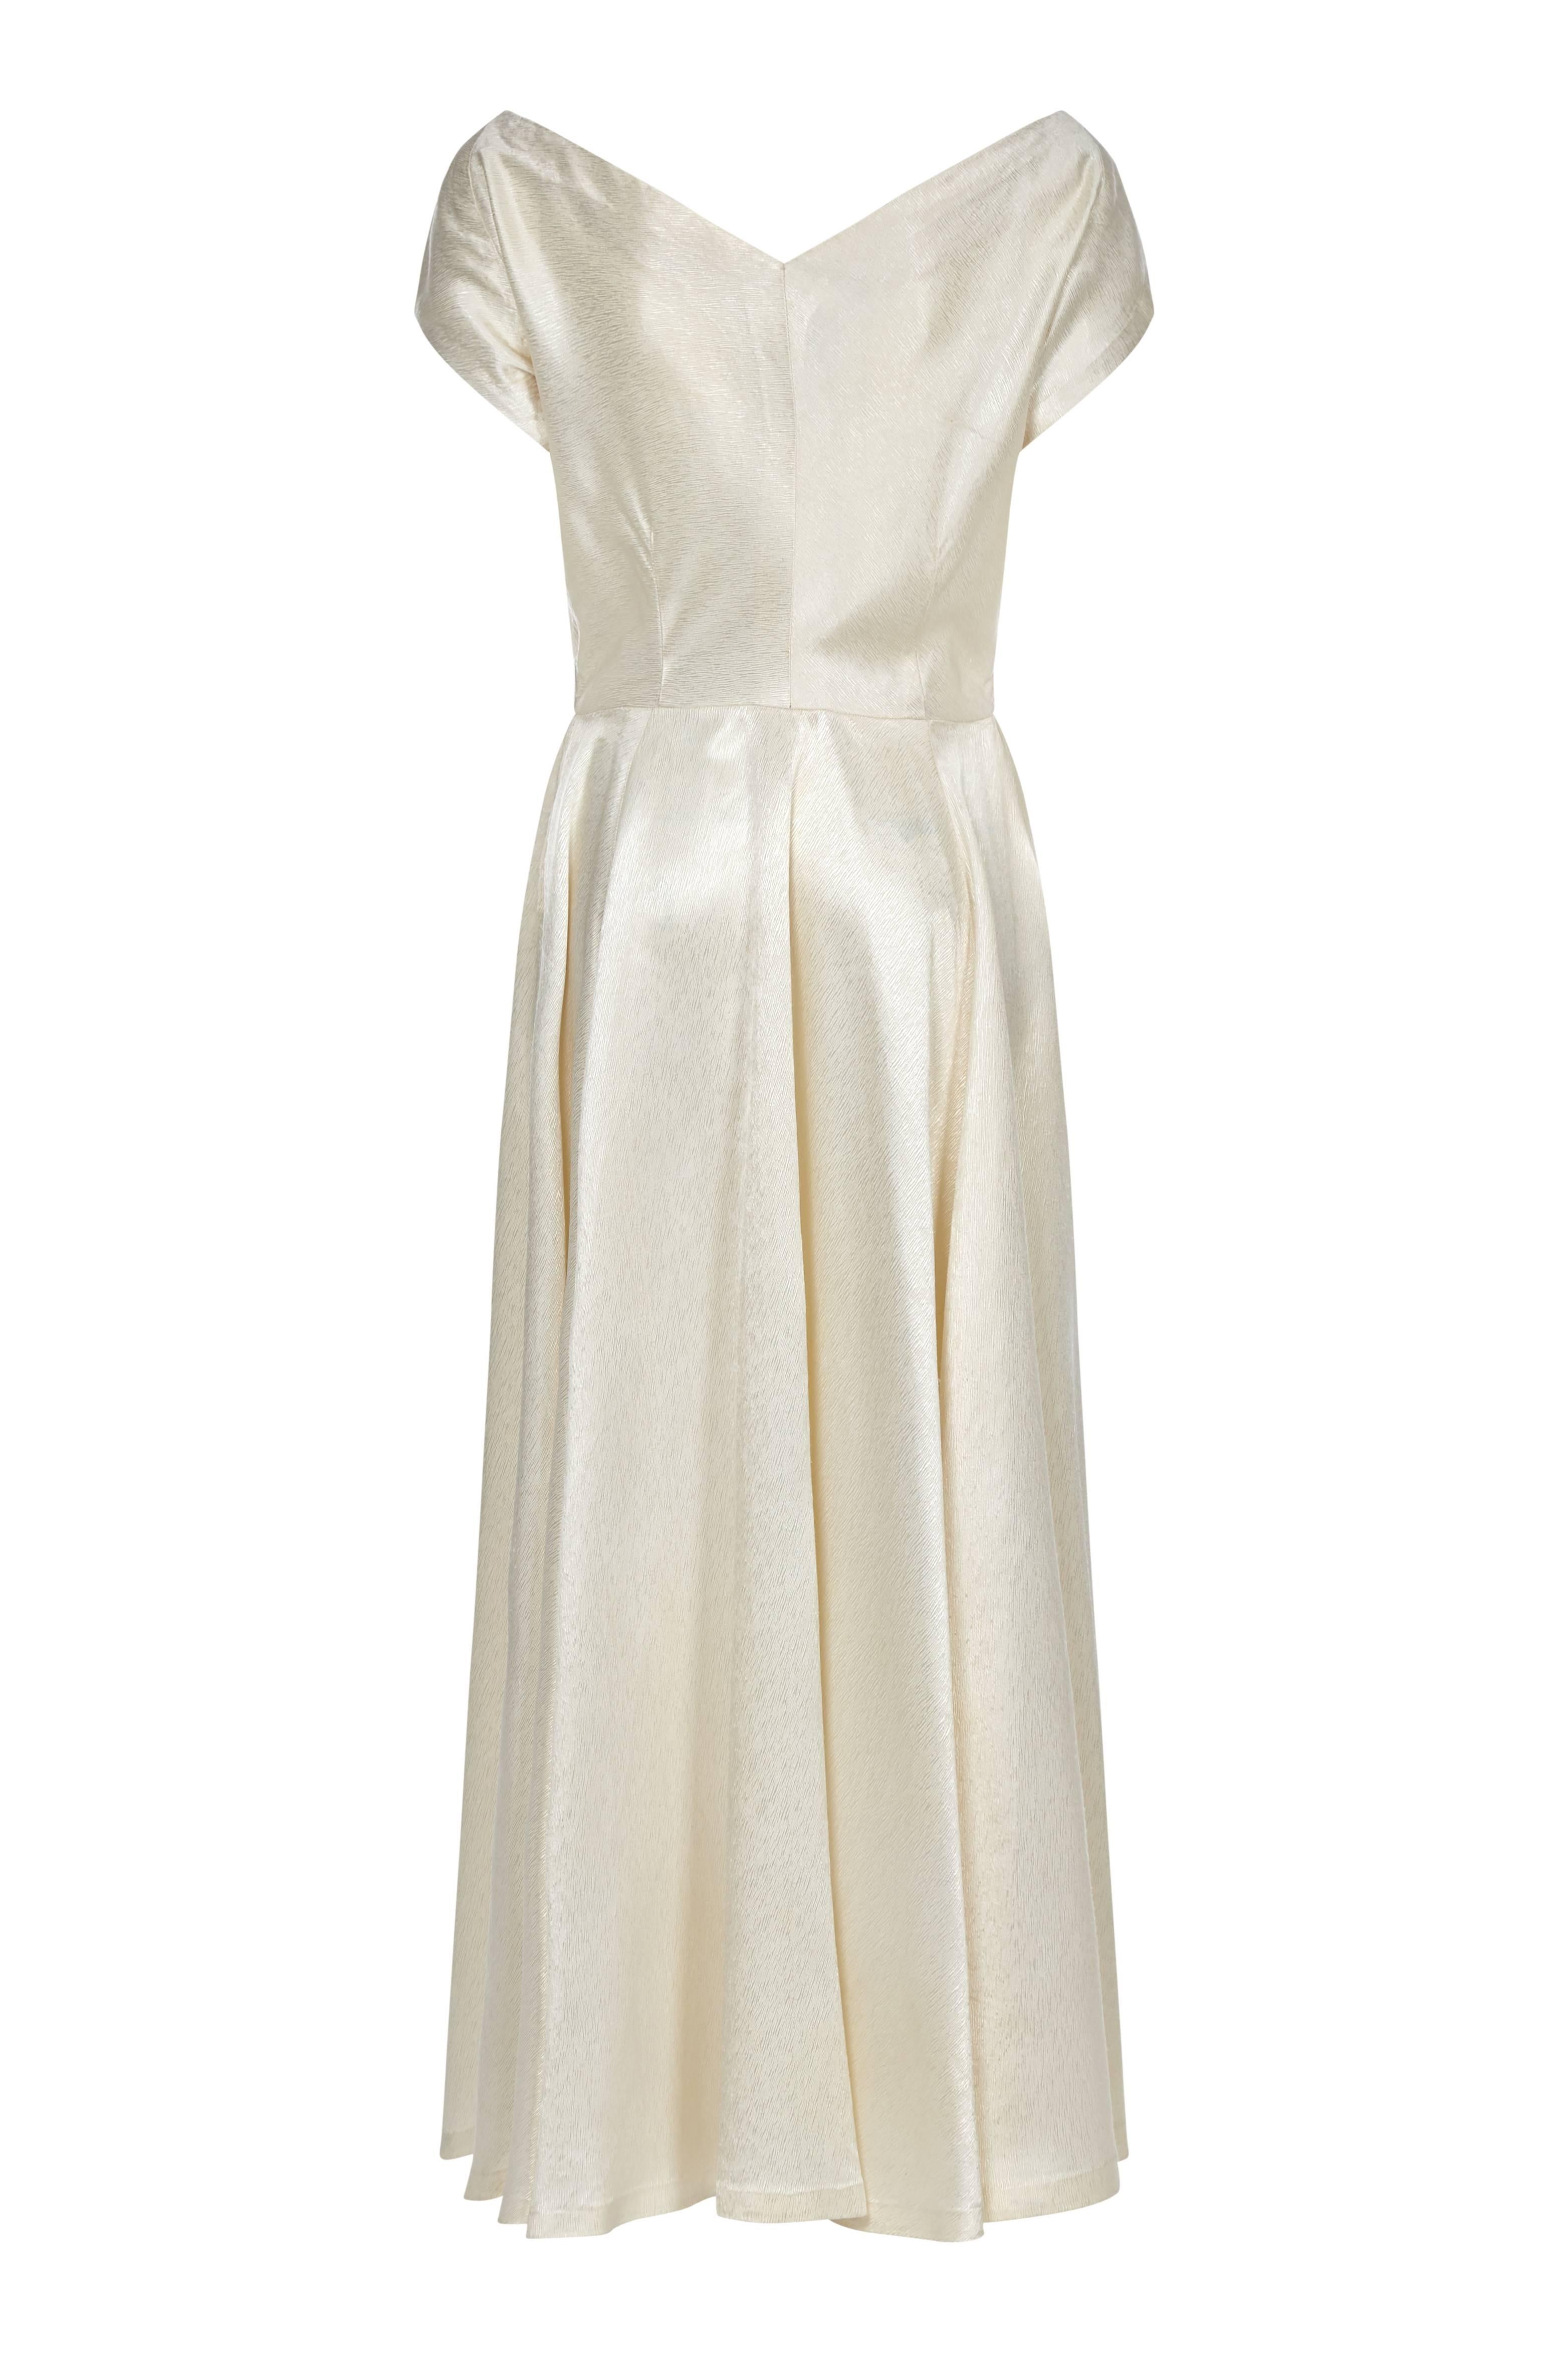 This elegant late 1940s pure silk ivory dress is a perfect example of the refined glamour of the era, its simple line skilfully accentuated by subtle detail in the construction. The thick, delicately embossed silk is a warm Ivory tone, and its